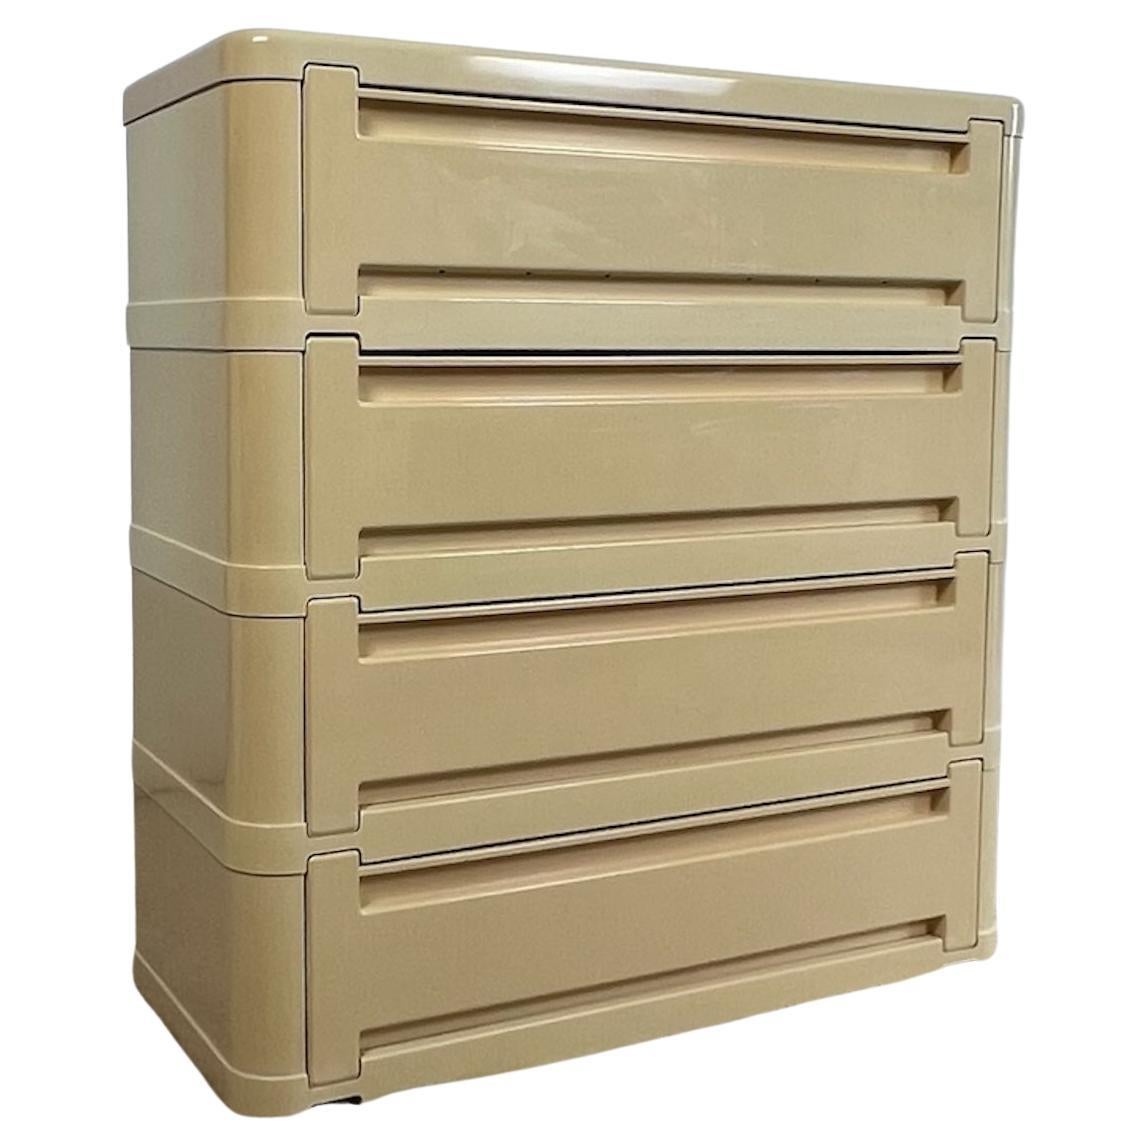 Olaf Von Bohr Chest of Drawers Model 4964 by Kartell - Space Age design, 70s